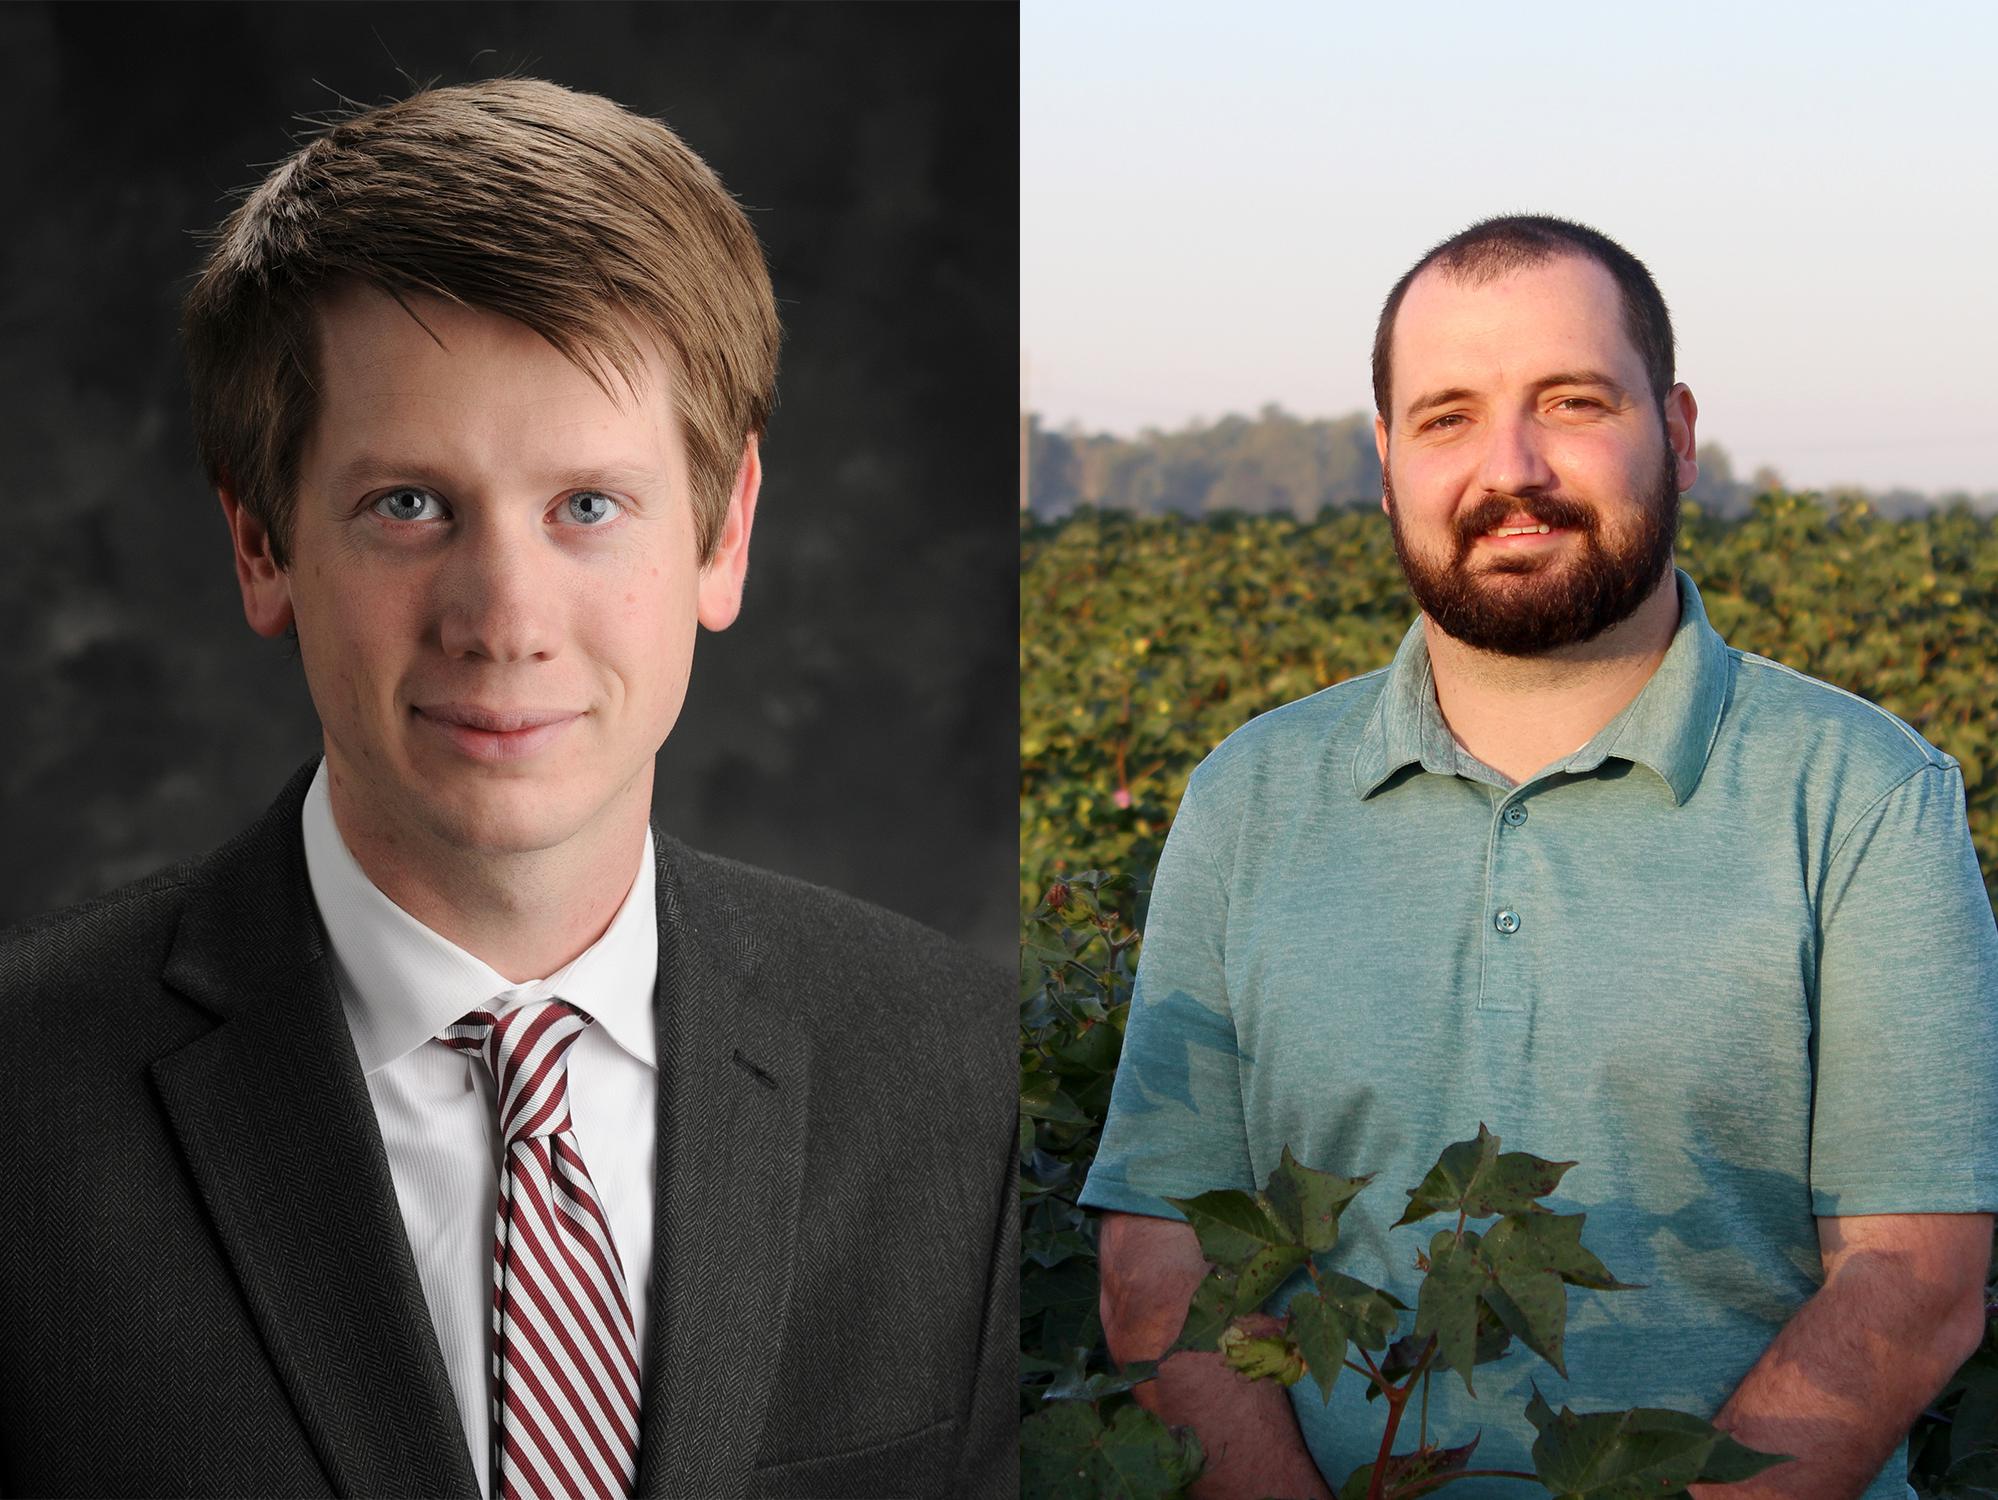 New ag economists Will Maples and Brian Mills.